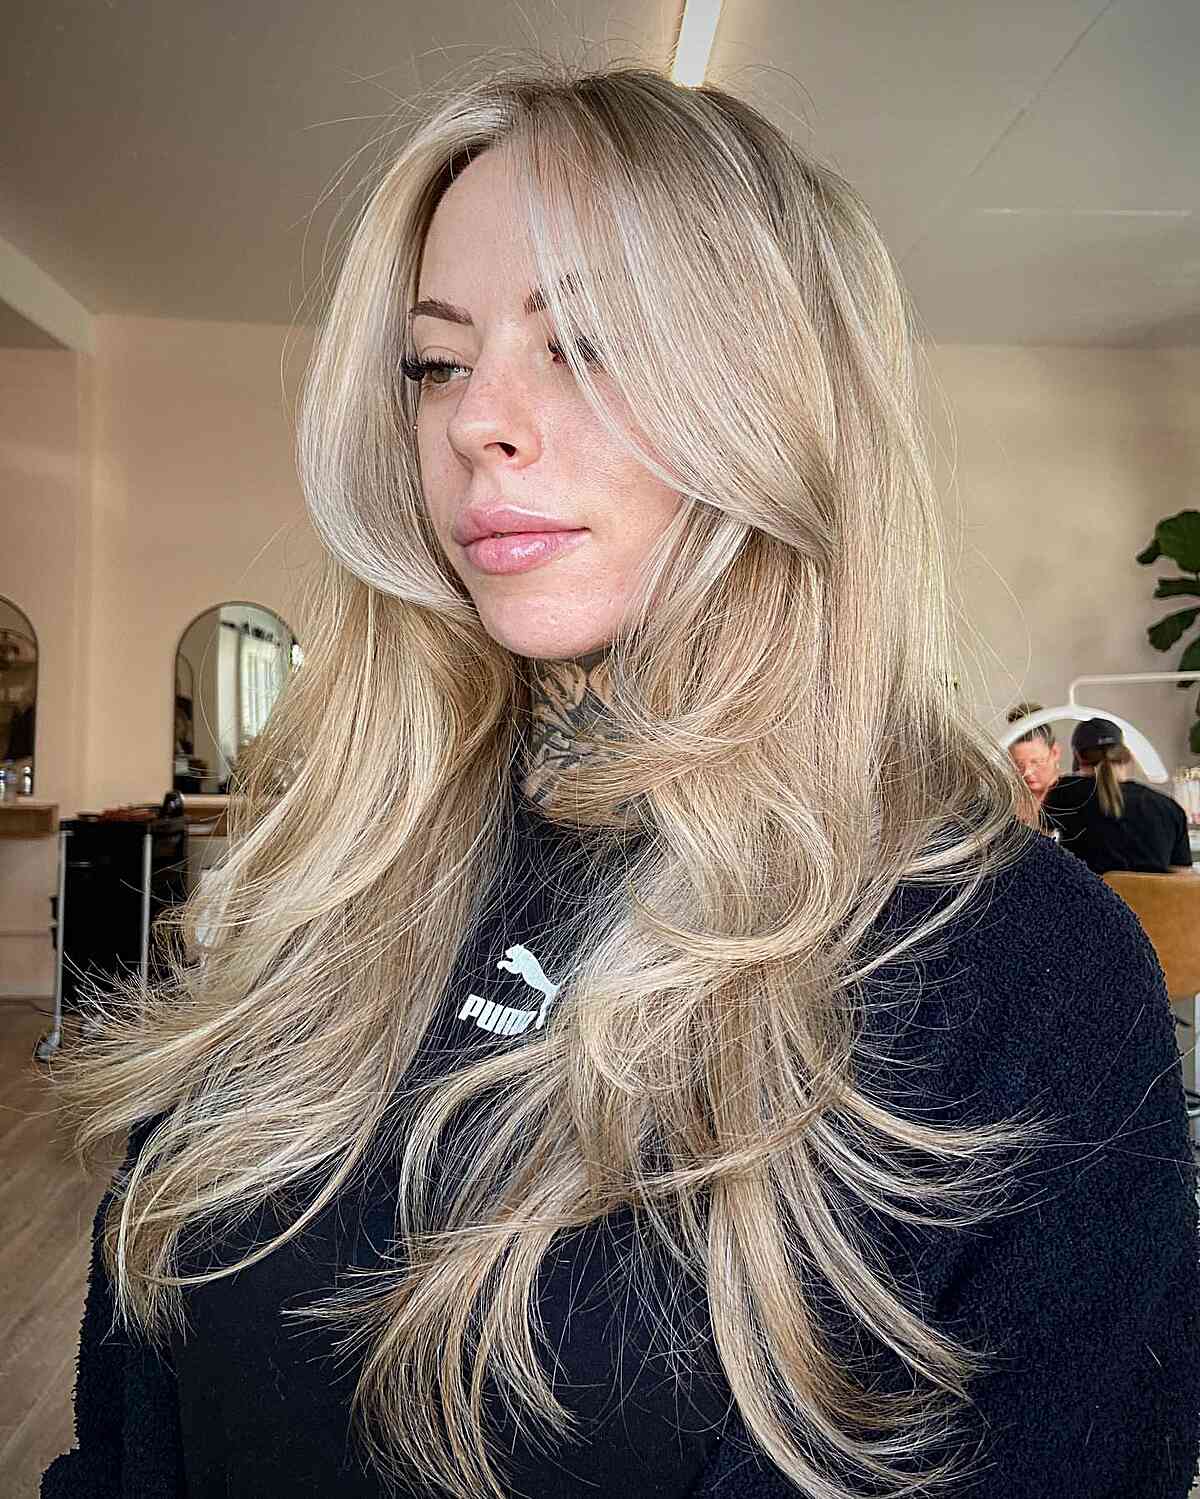 Creamy Blonde Hair with Long Feathered Butterfly Cut